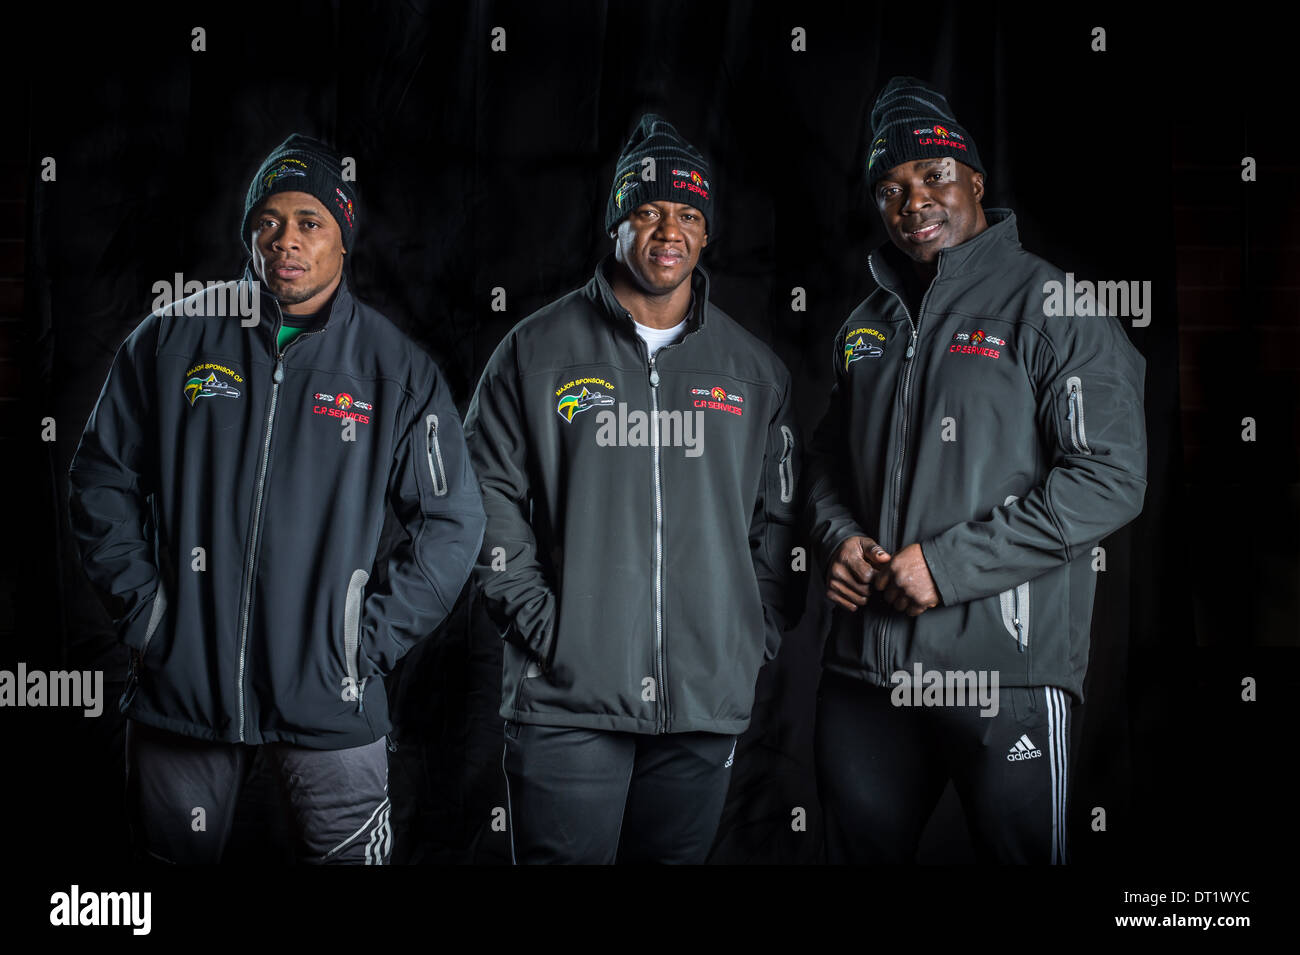 Jamaican Bobsled Team Gains Sponsorship Just in Time for Sochi Olympics Stock Photo